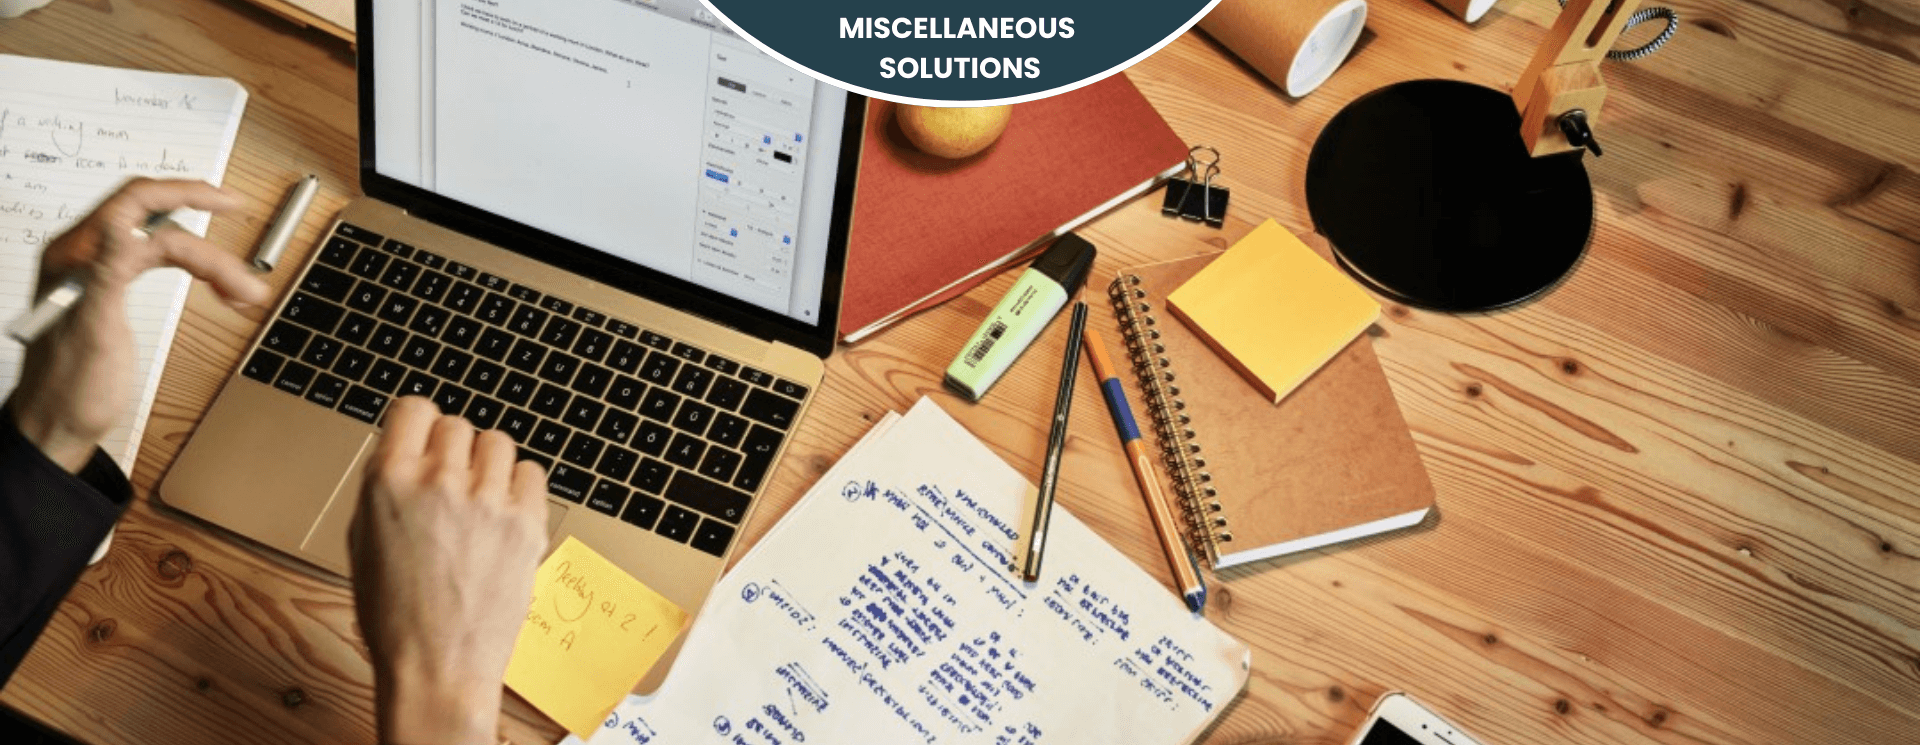 MISCELLANEOUS SOLUTIONS